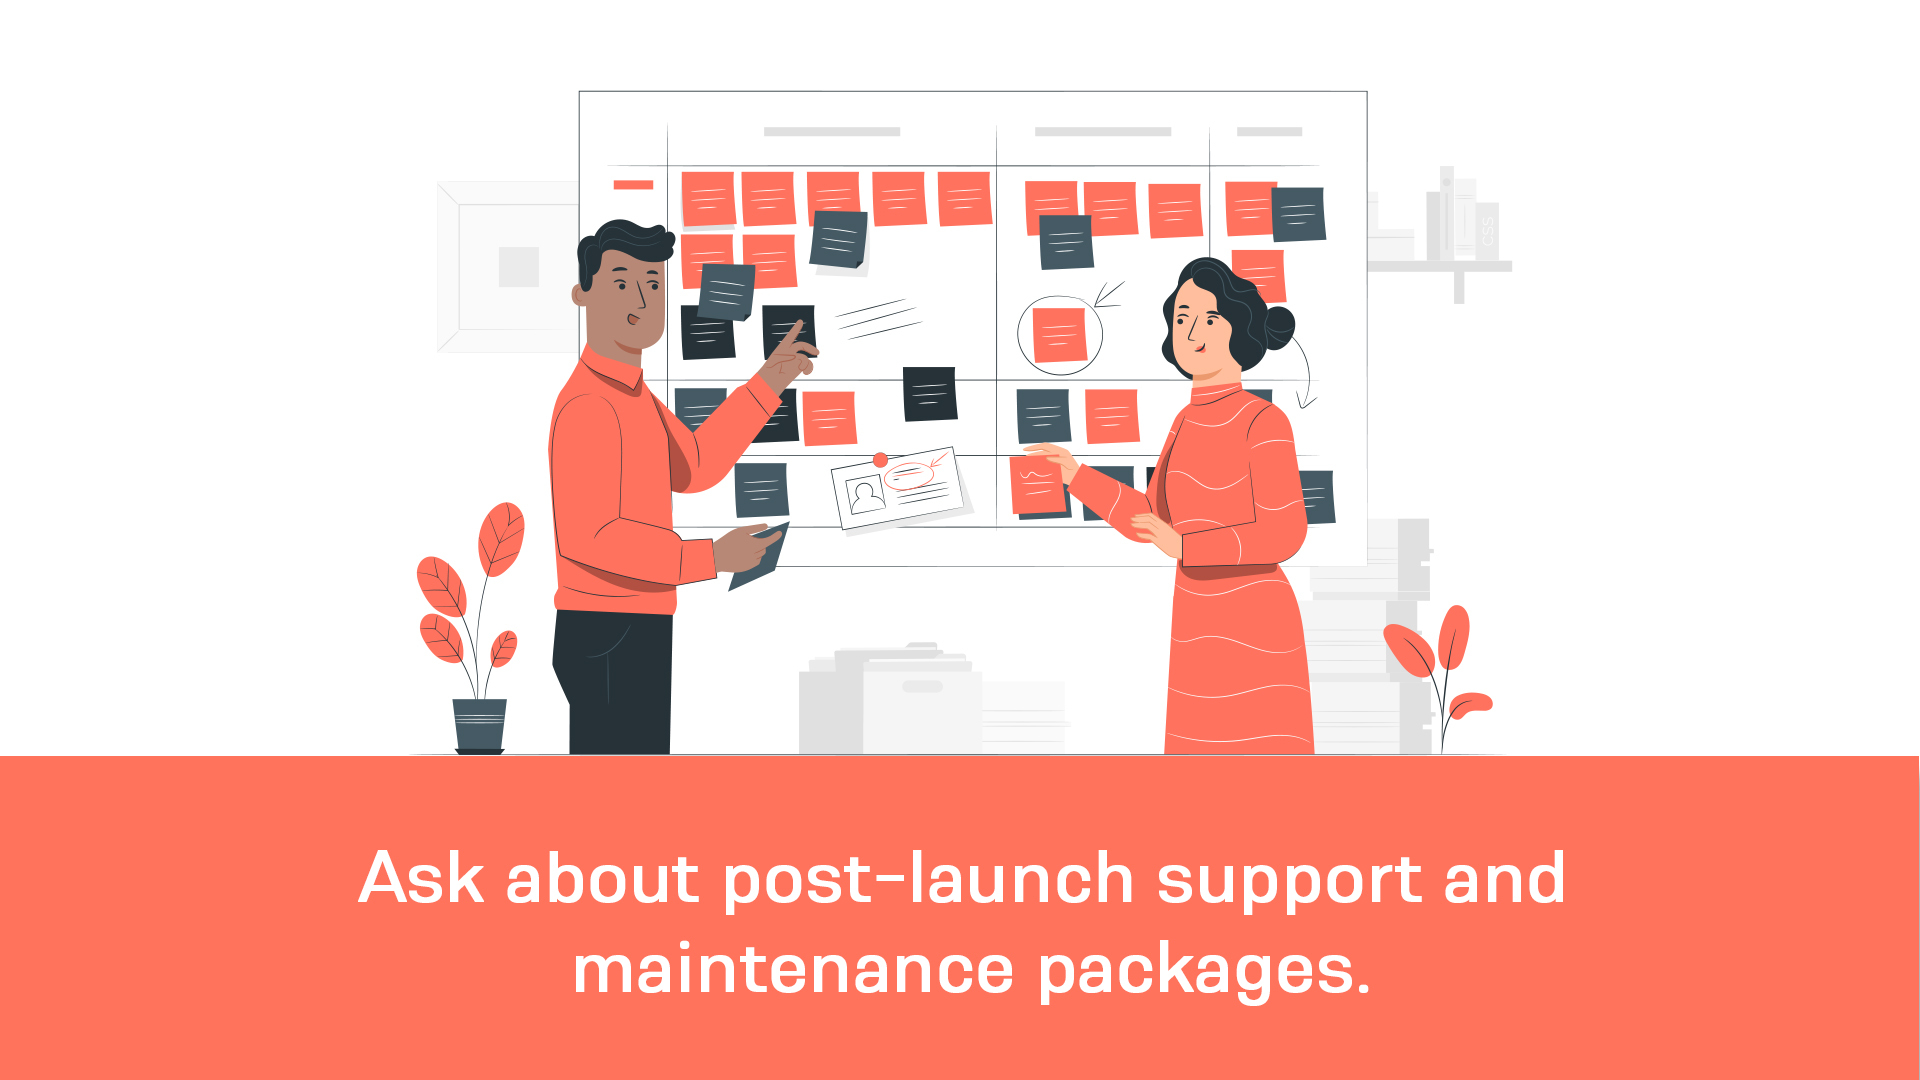 enquire about post-launch support and maintenance packages